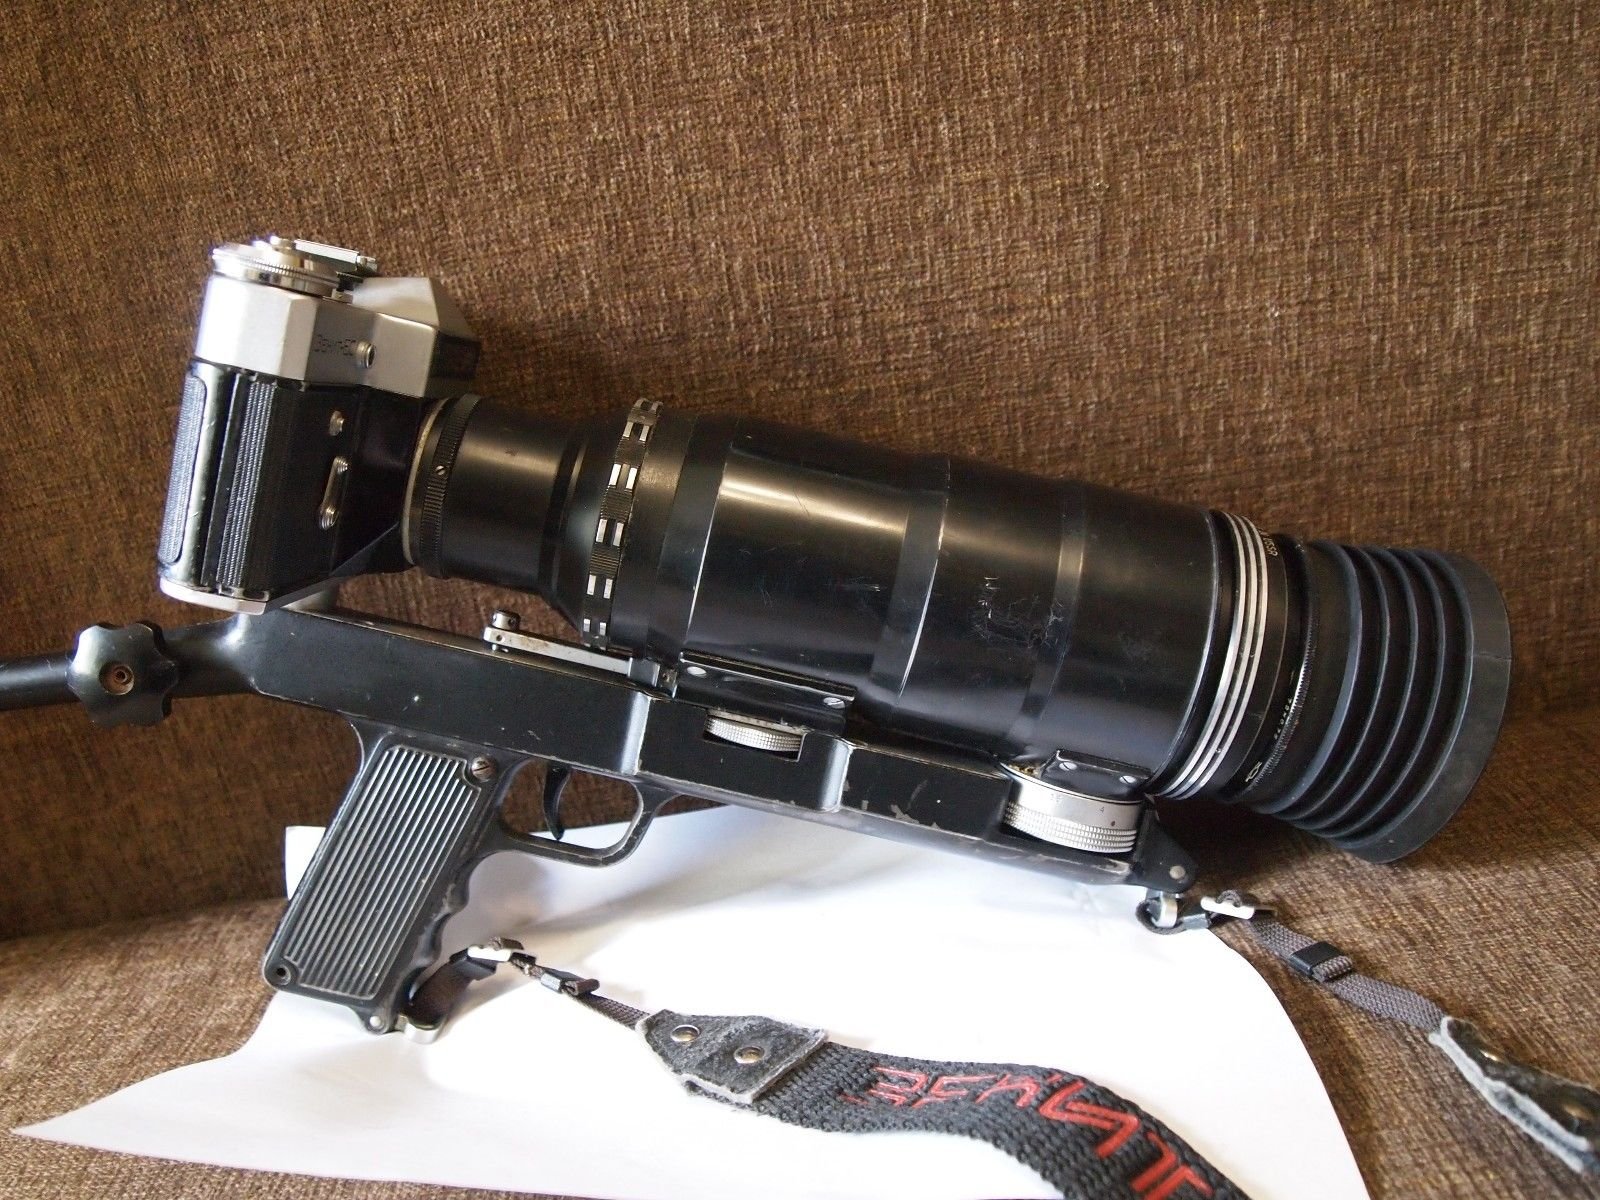 This Unusual Zenit Photosniper Cam Would Probably Get You Shot Today